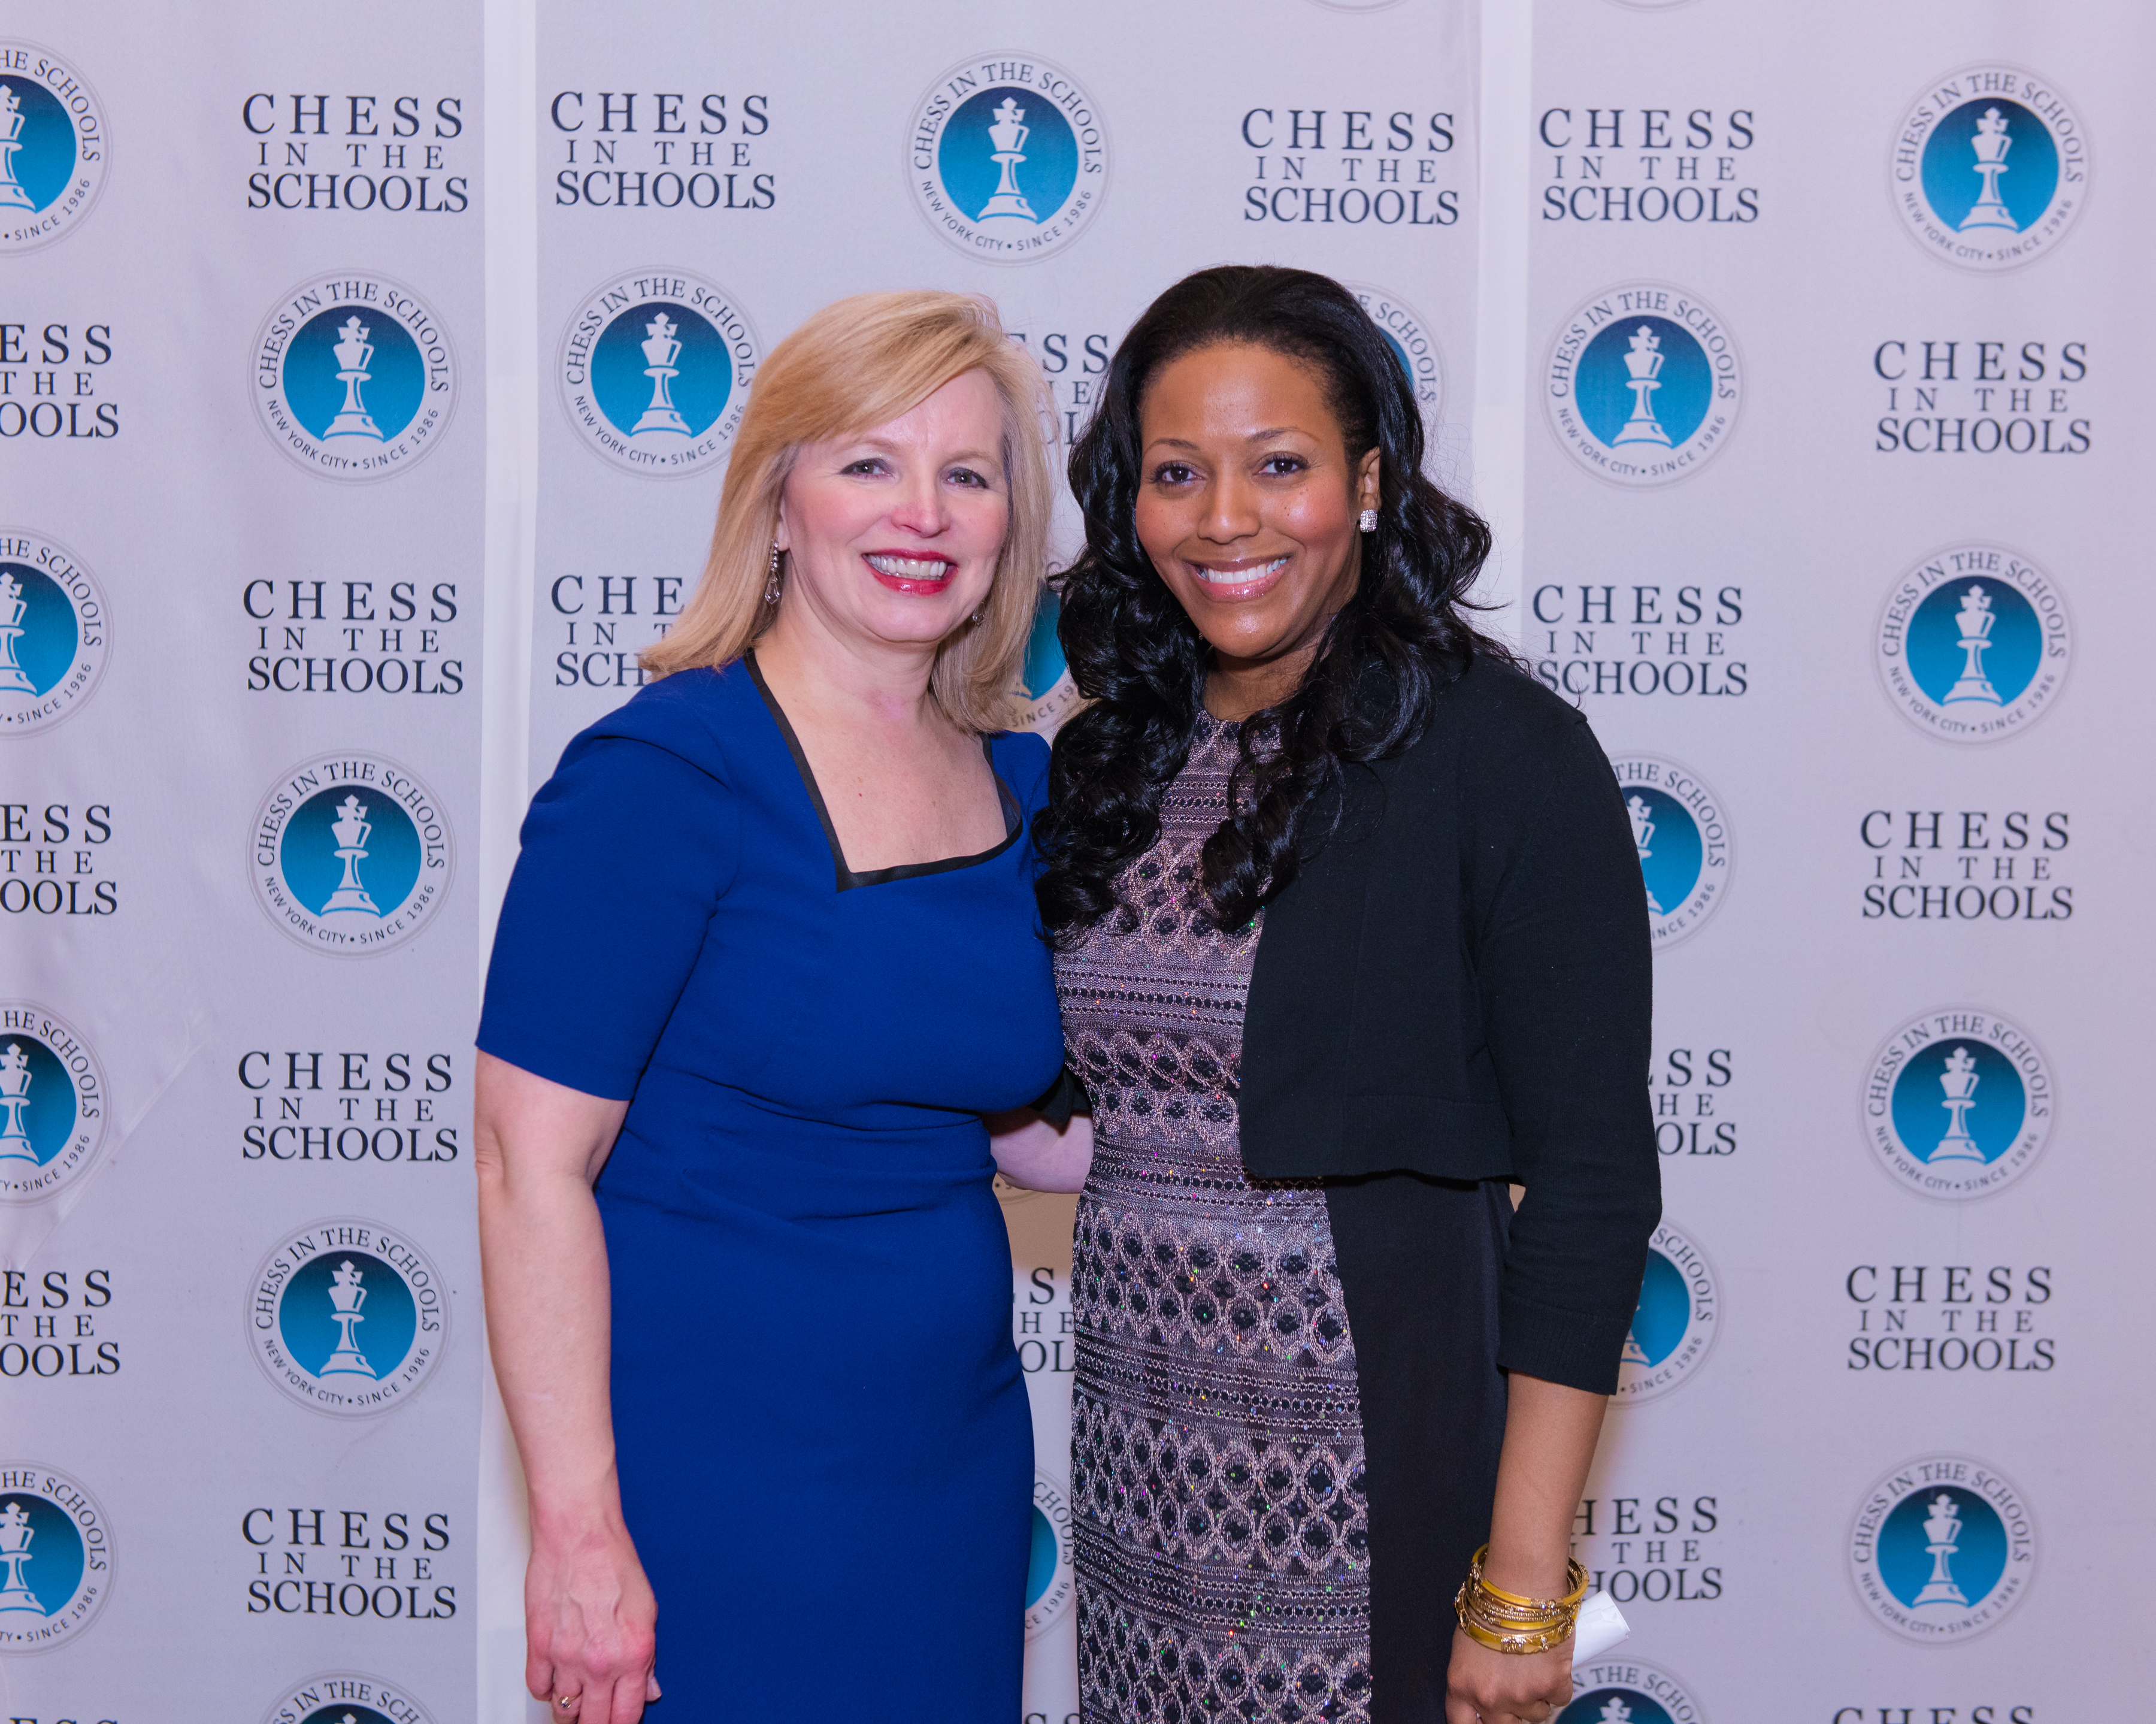 Cindy Swabsin from the NFL with Chess in the Schools Vice President of Development and Communications, Yolanda F. Johnson.